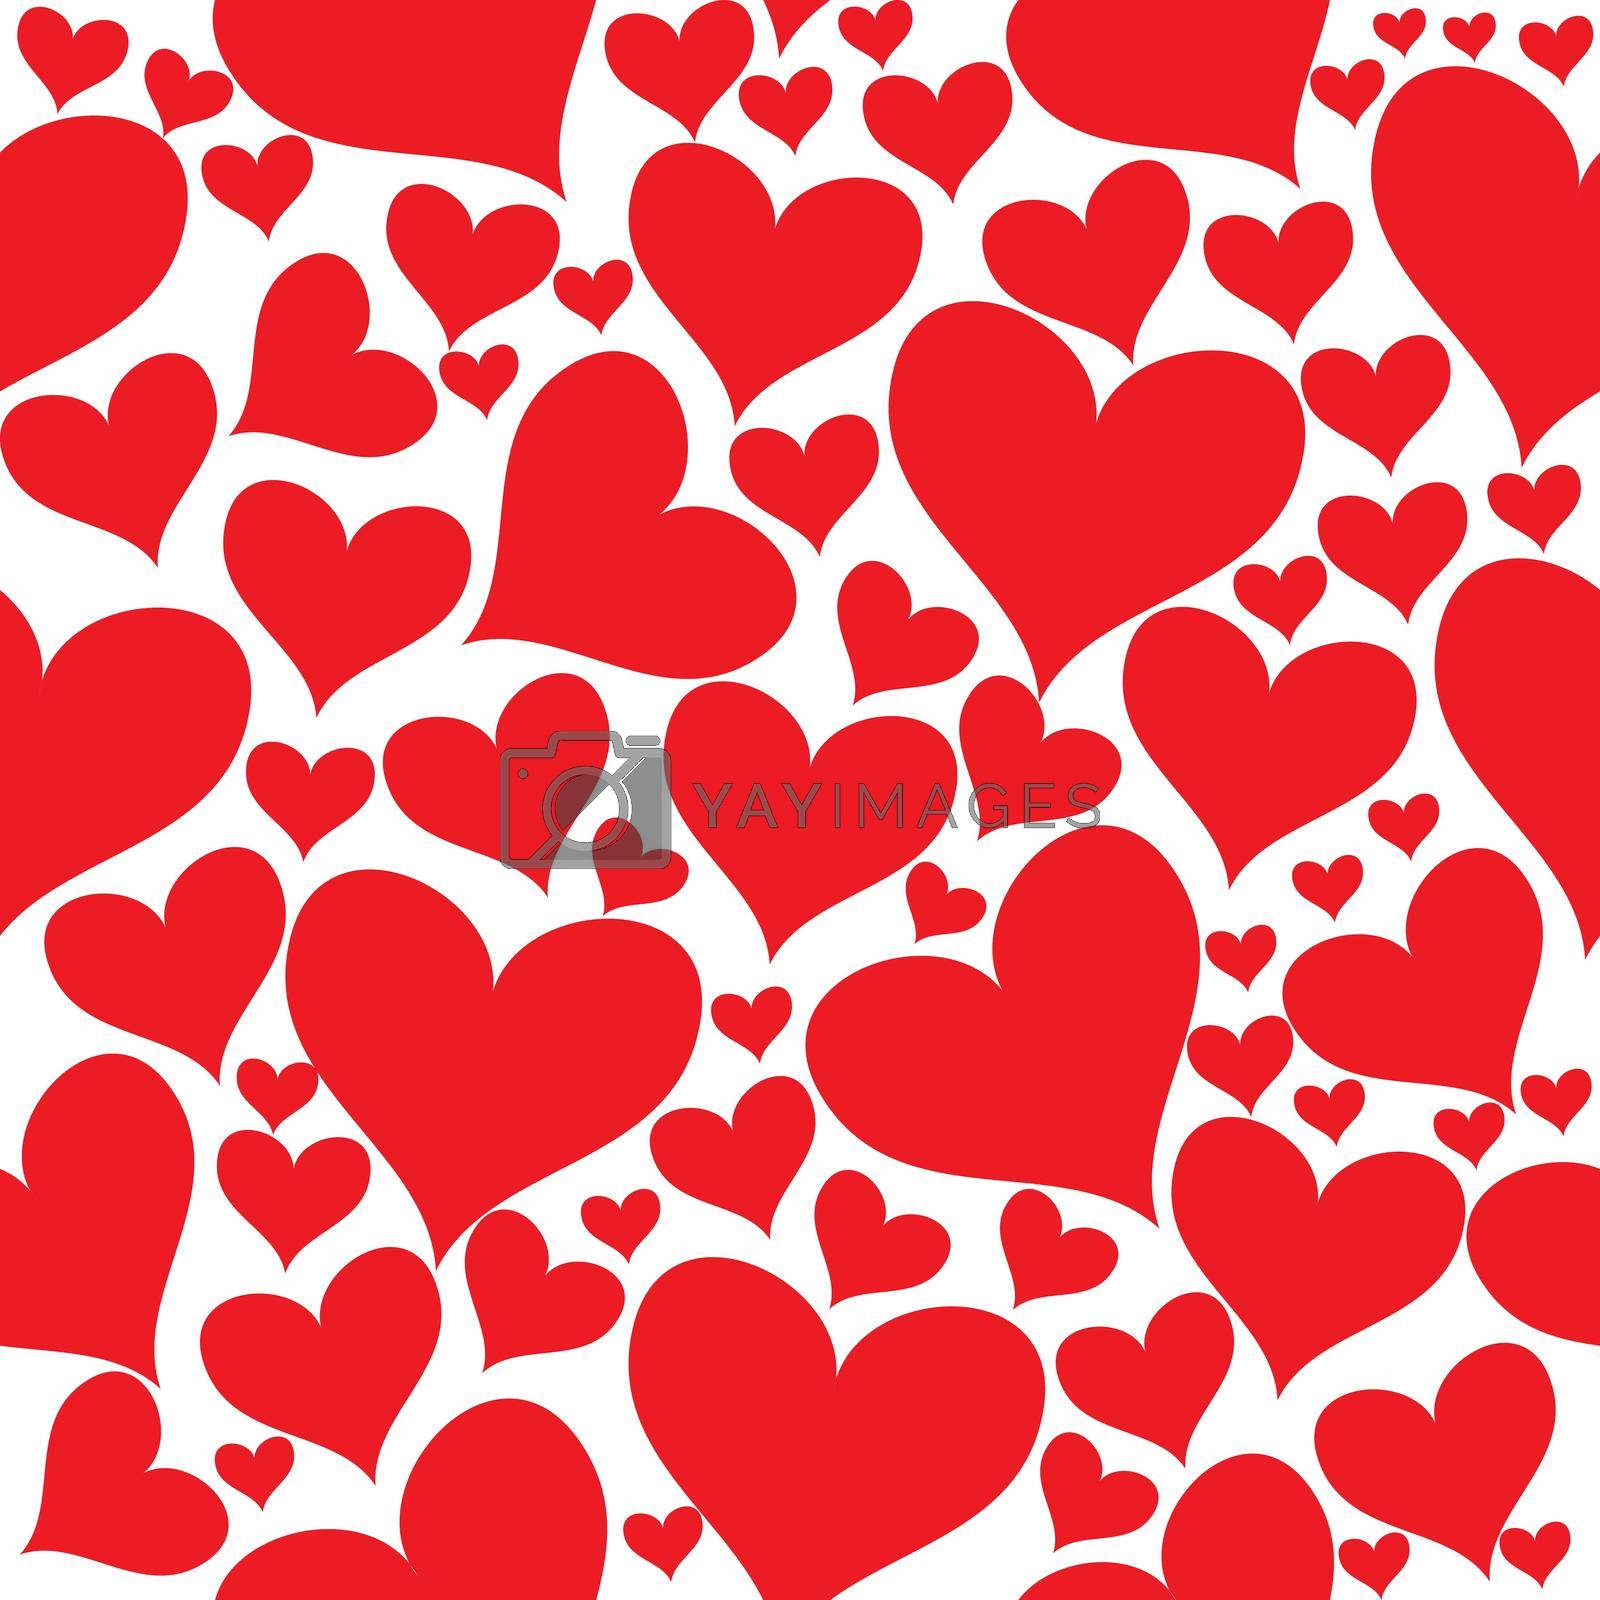 Happy Valentines Day Seamless Pattern Vector Illustration